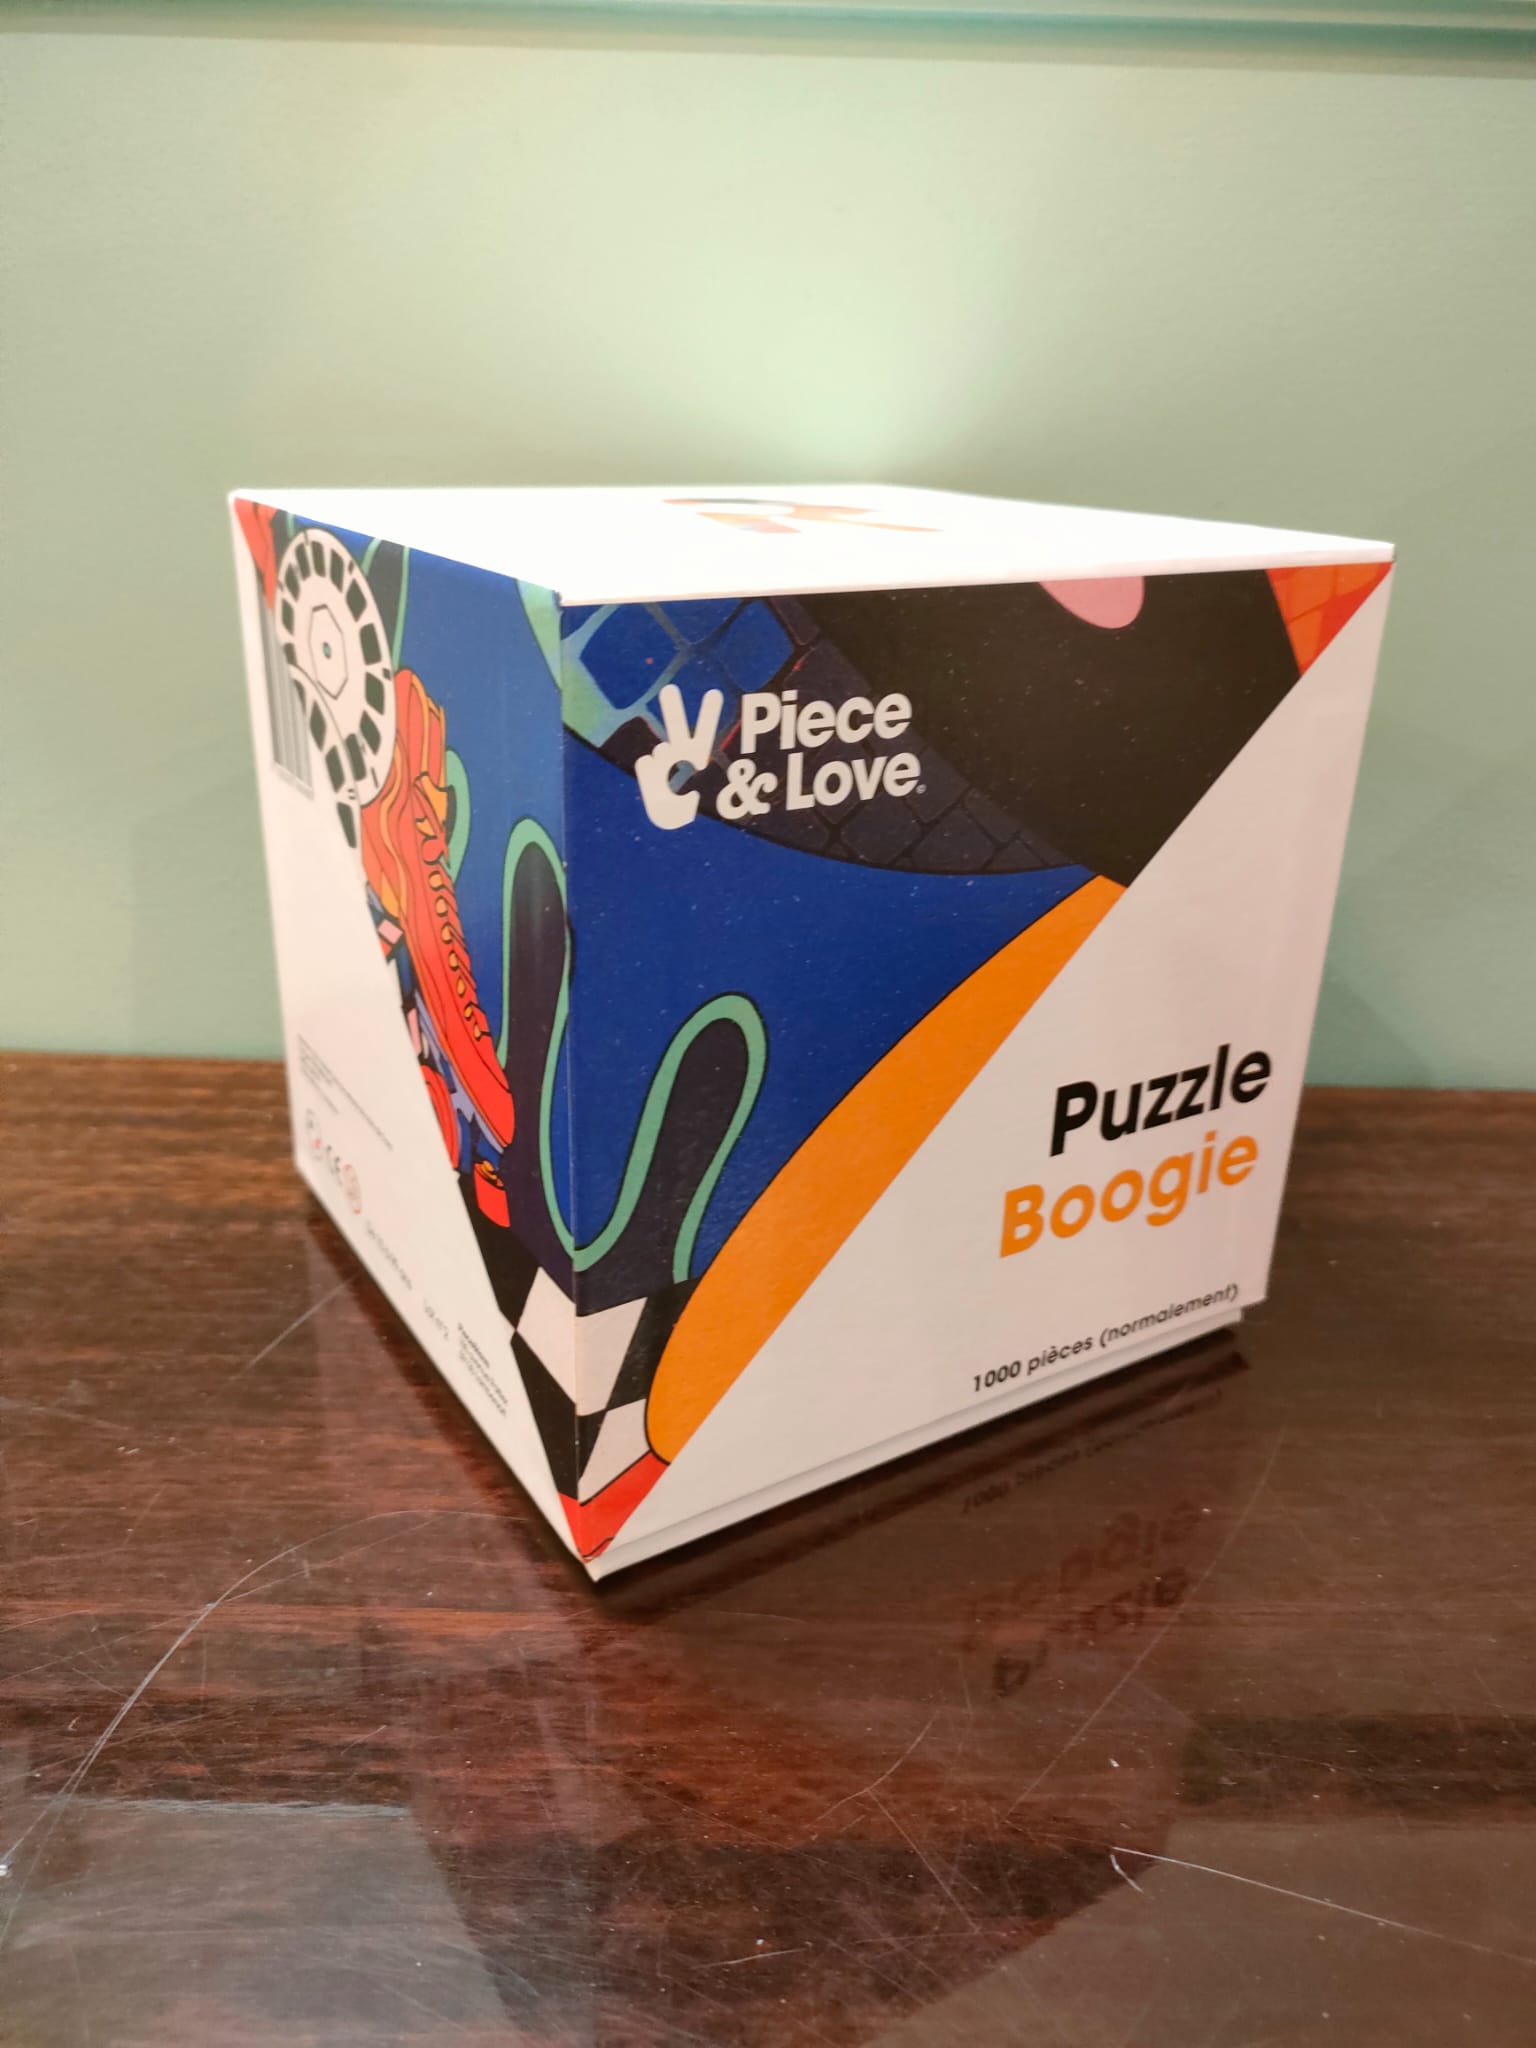 Puzzle 1000 pièces Boogie - Made in France - Piece & Love